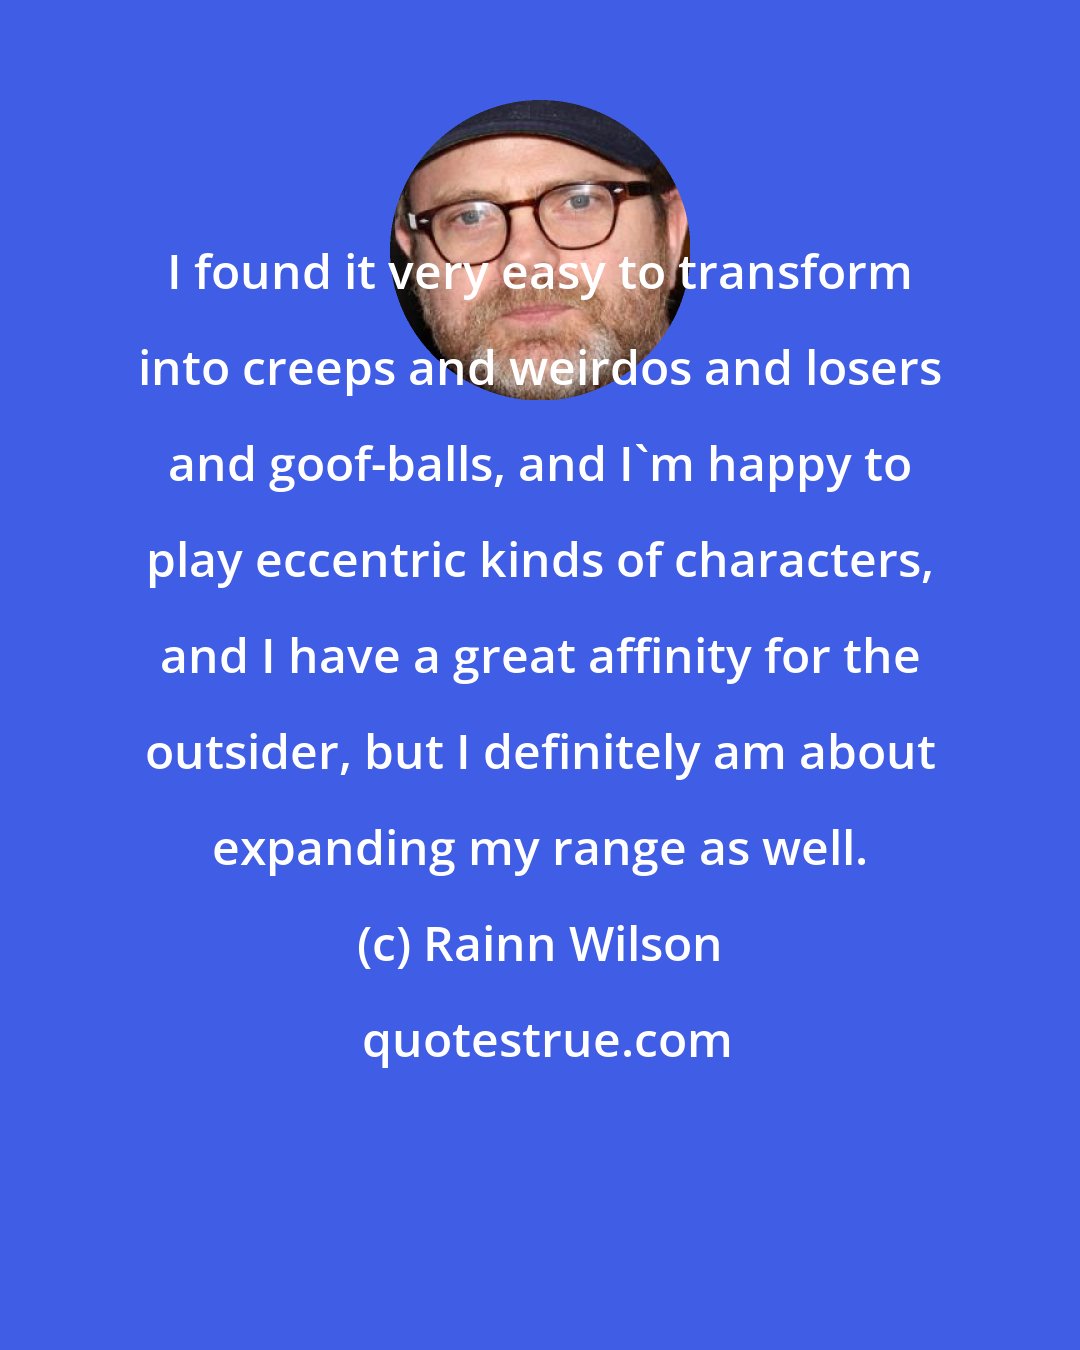 Rainn Wilson: I found it very easy to transform into creeps and weirdos and losers and goof-balls, and I'm happy to play eccentric kinds of characters, and I have a great affinity for the outsider, but I definitely am about expanding my range as well.